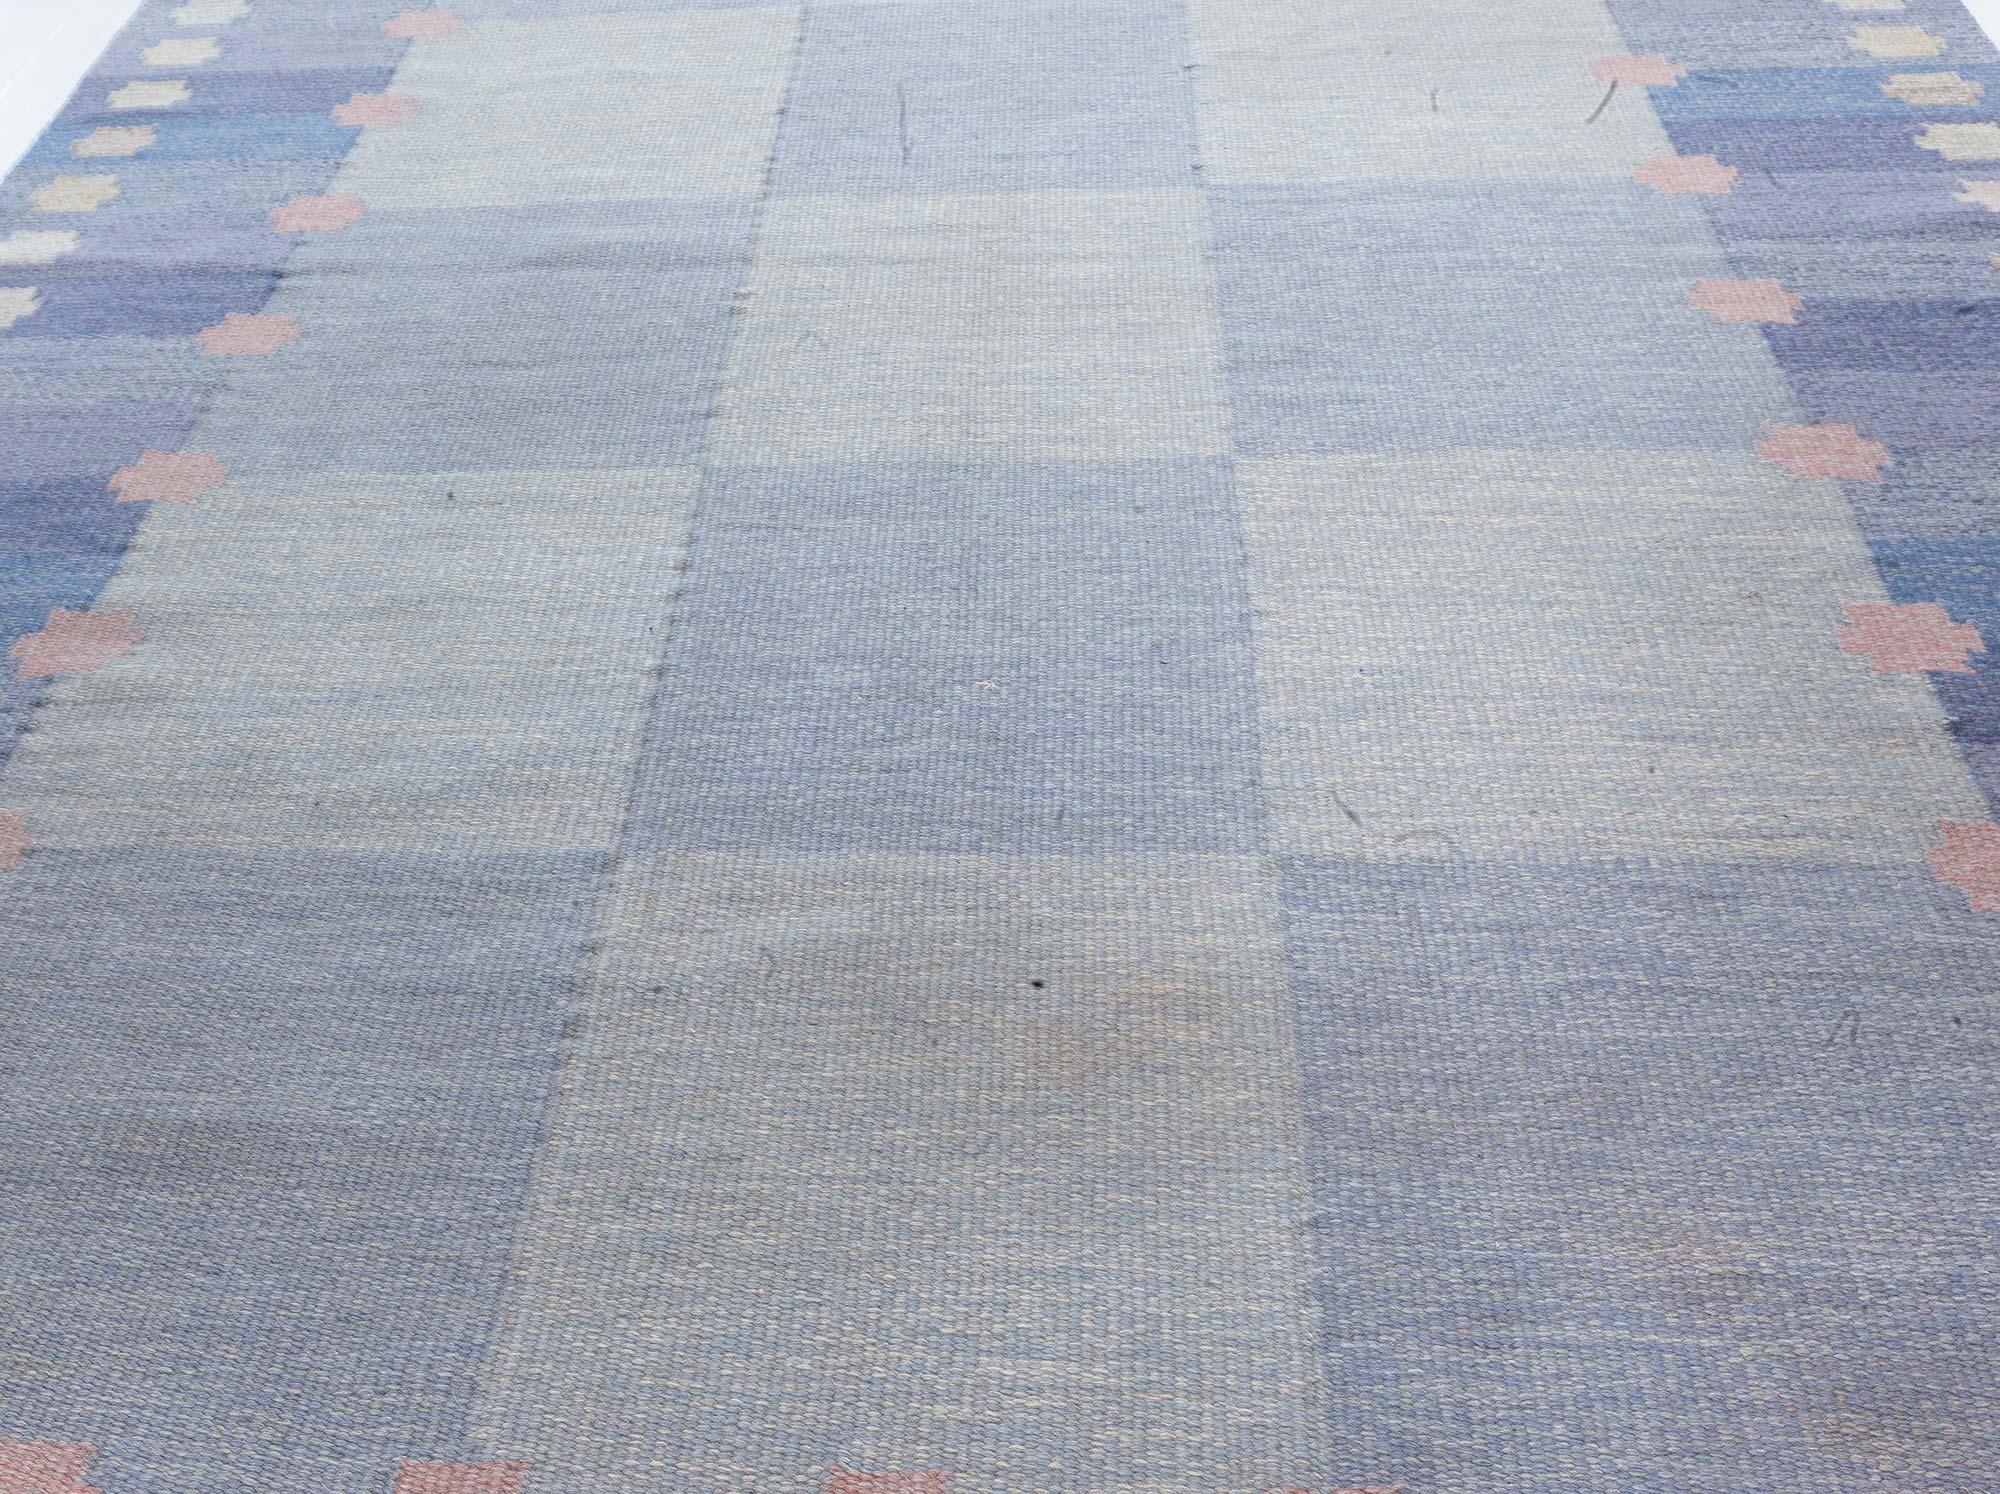 Mid-20th Century Swedish Flat Woven Rug by Agda Osterberg
Size: 6'4